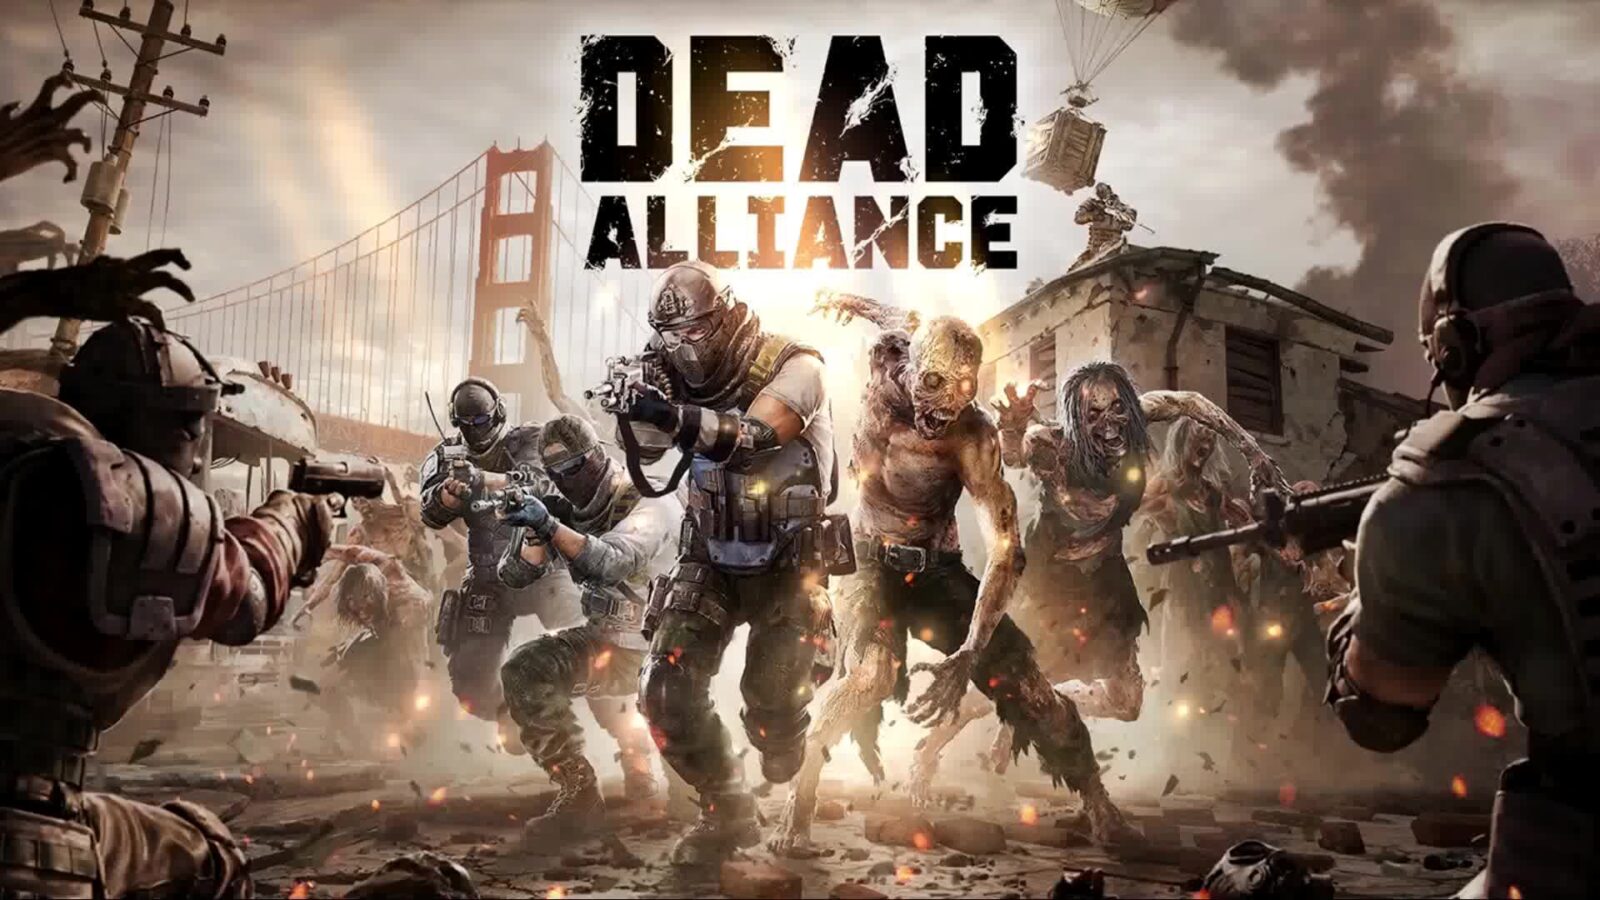 LiveWallpapers4Free.com | Dead Alliance Zombie Invasion - Free Live Wallpaper